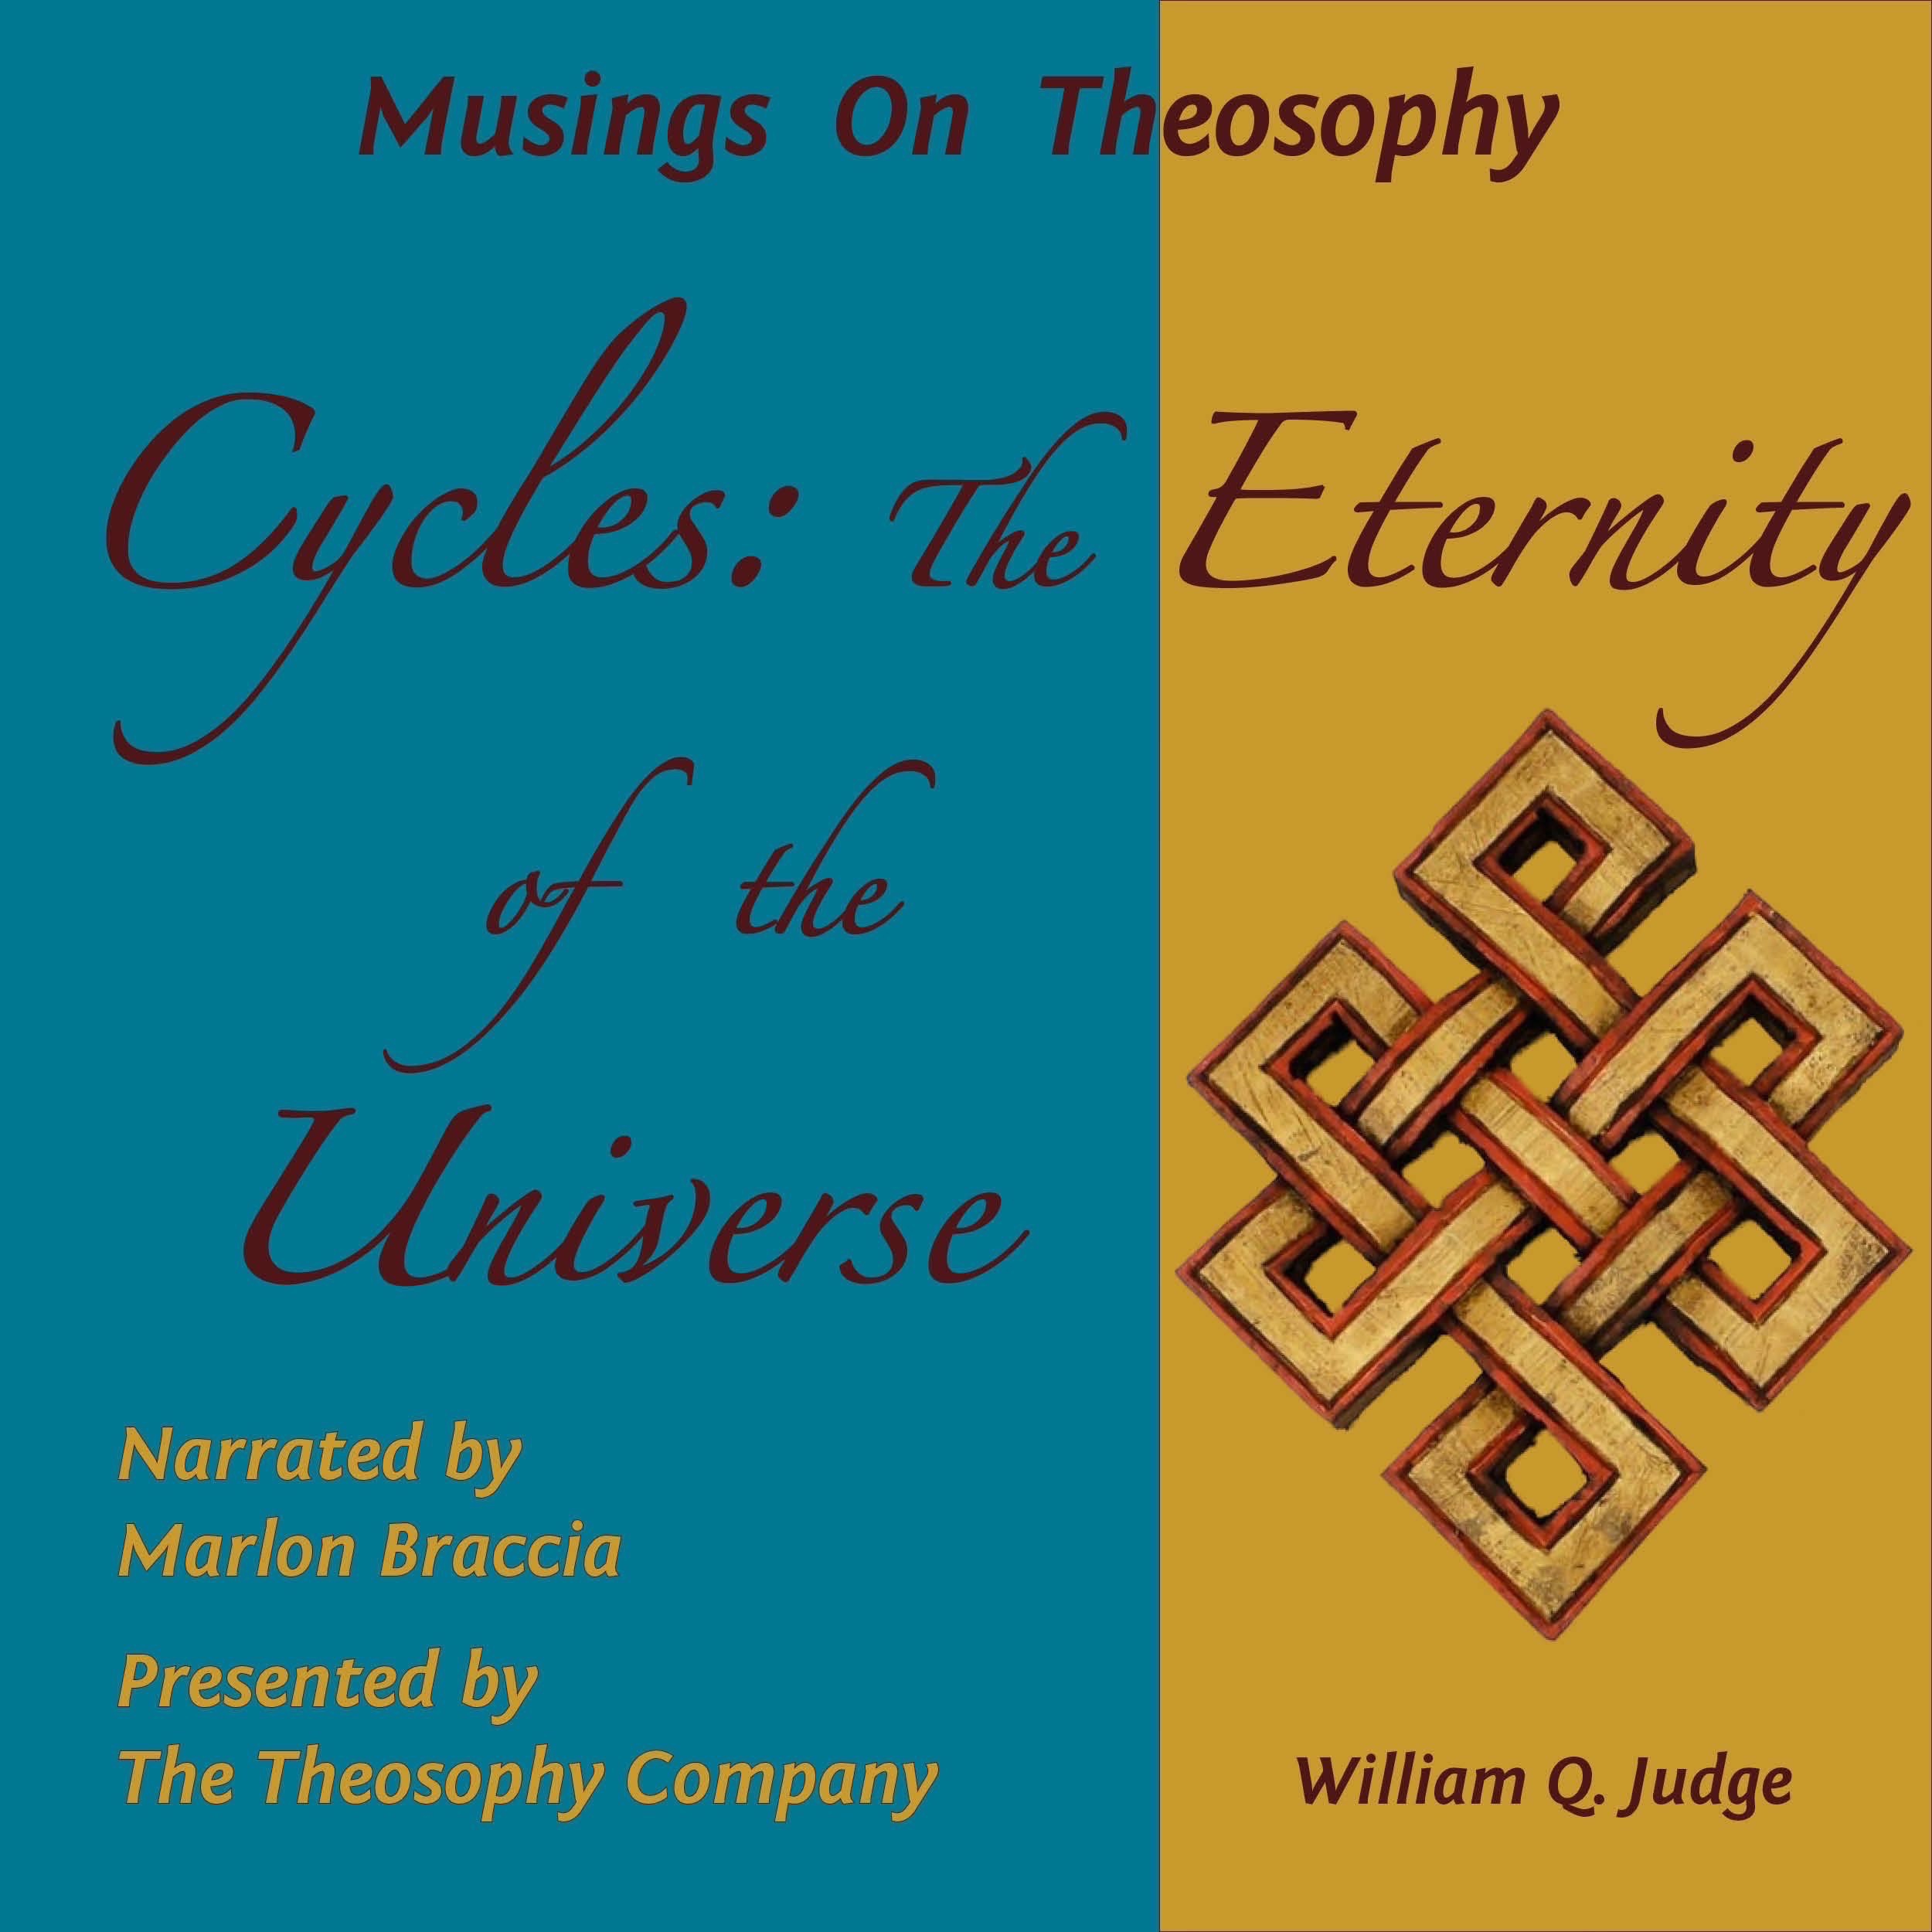 Cycles: The Eternity of the Universe